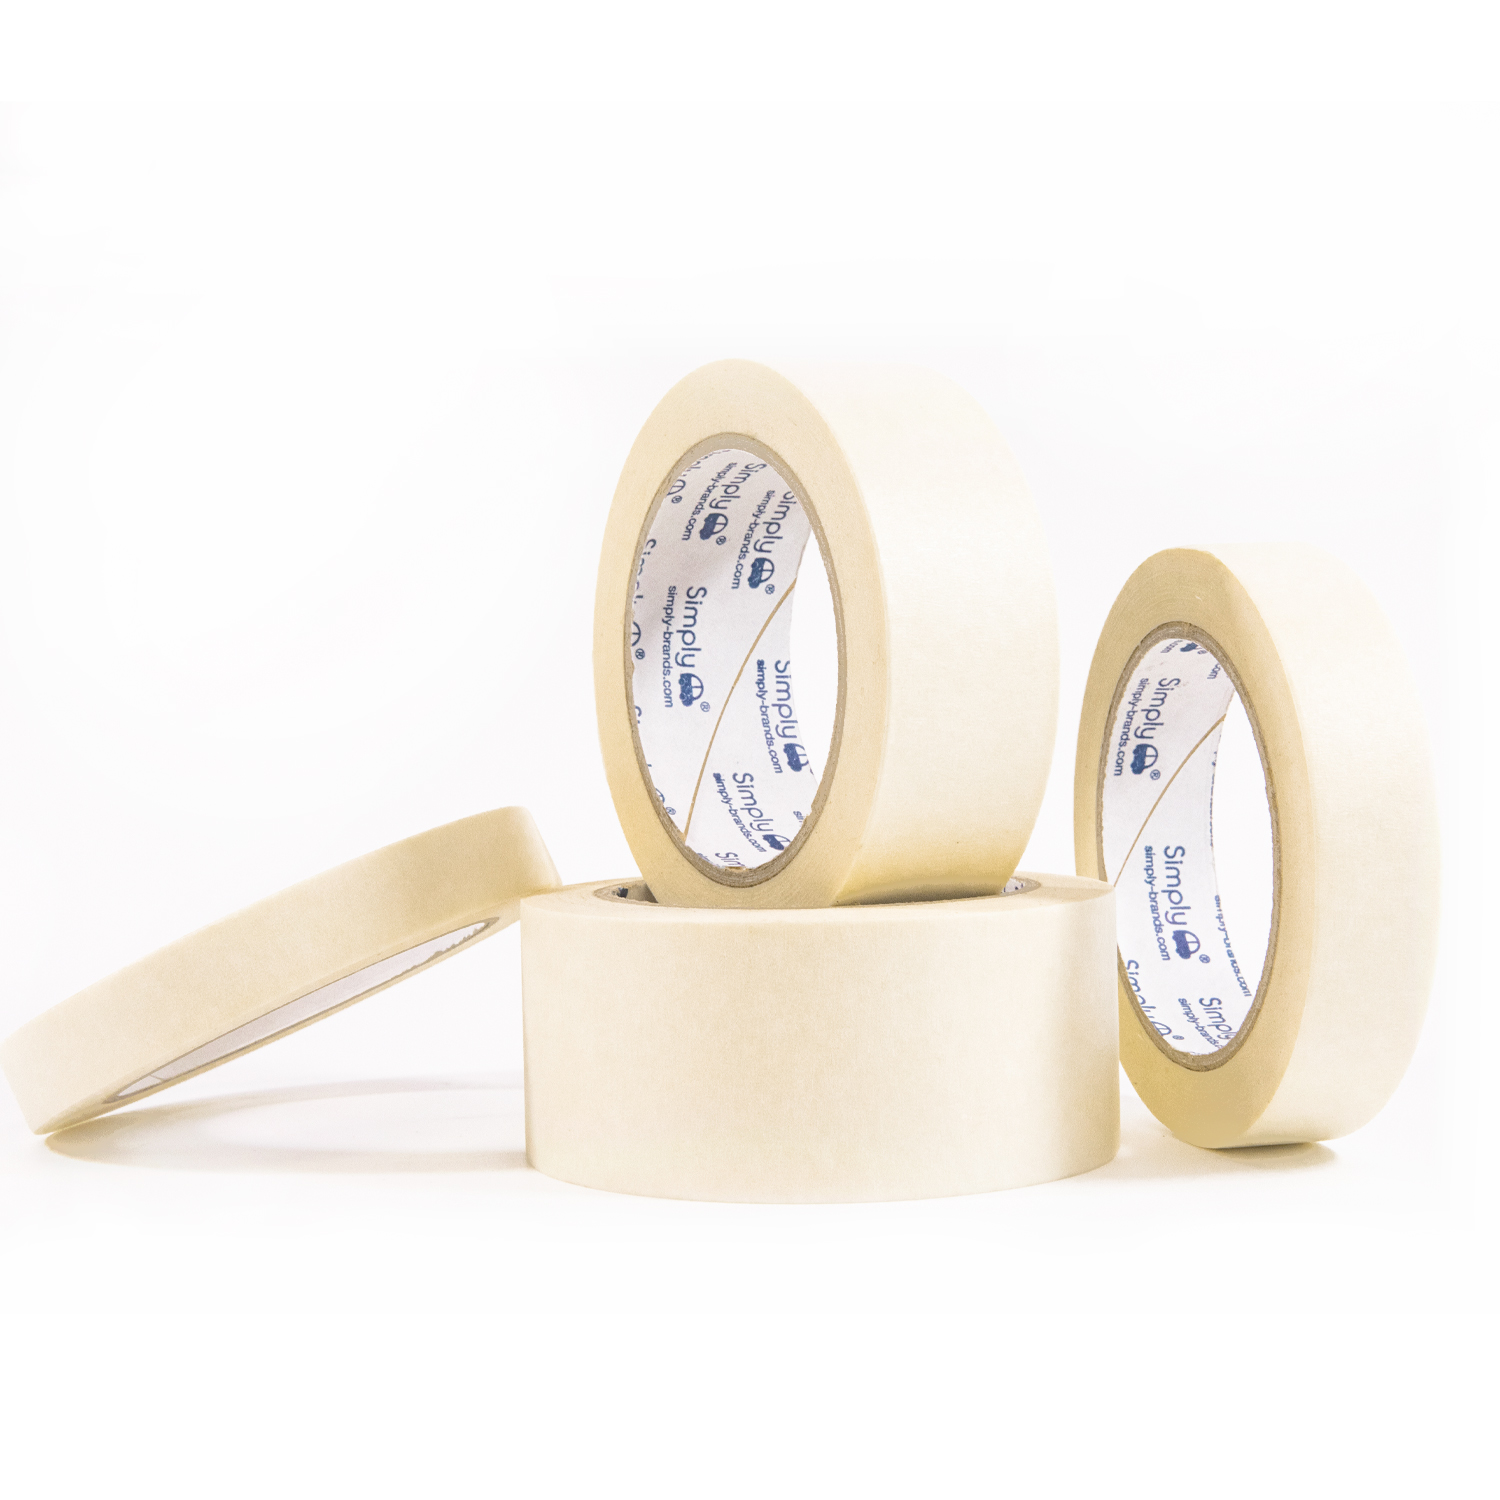 Simply Auto 48MM*50M MASKING TAPE - SMT48